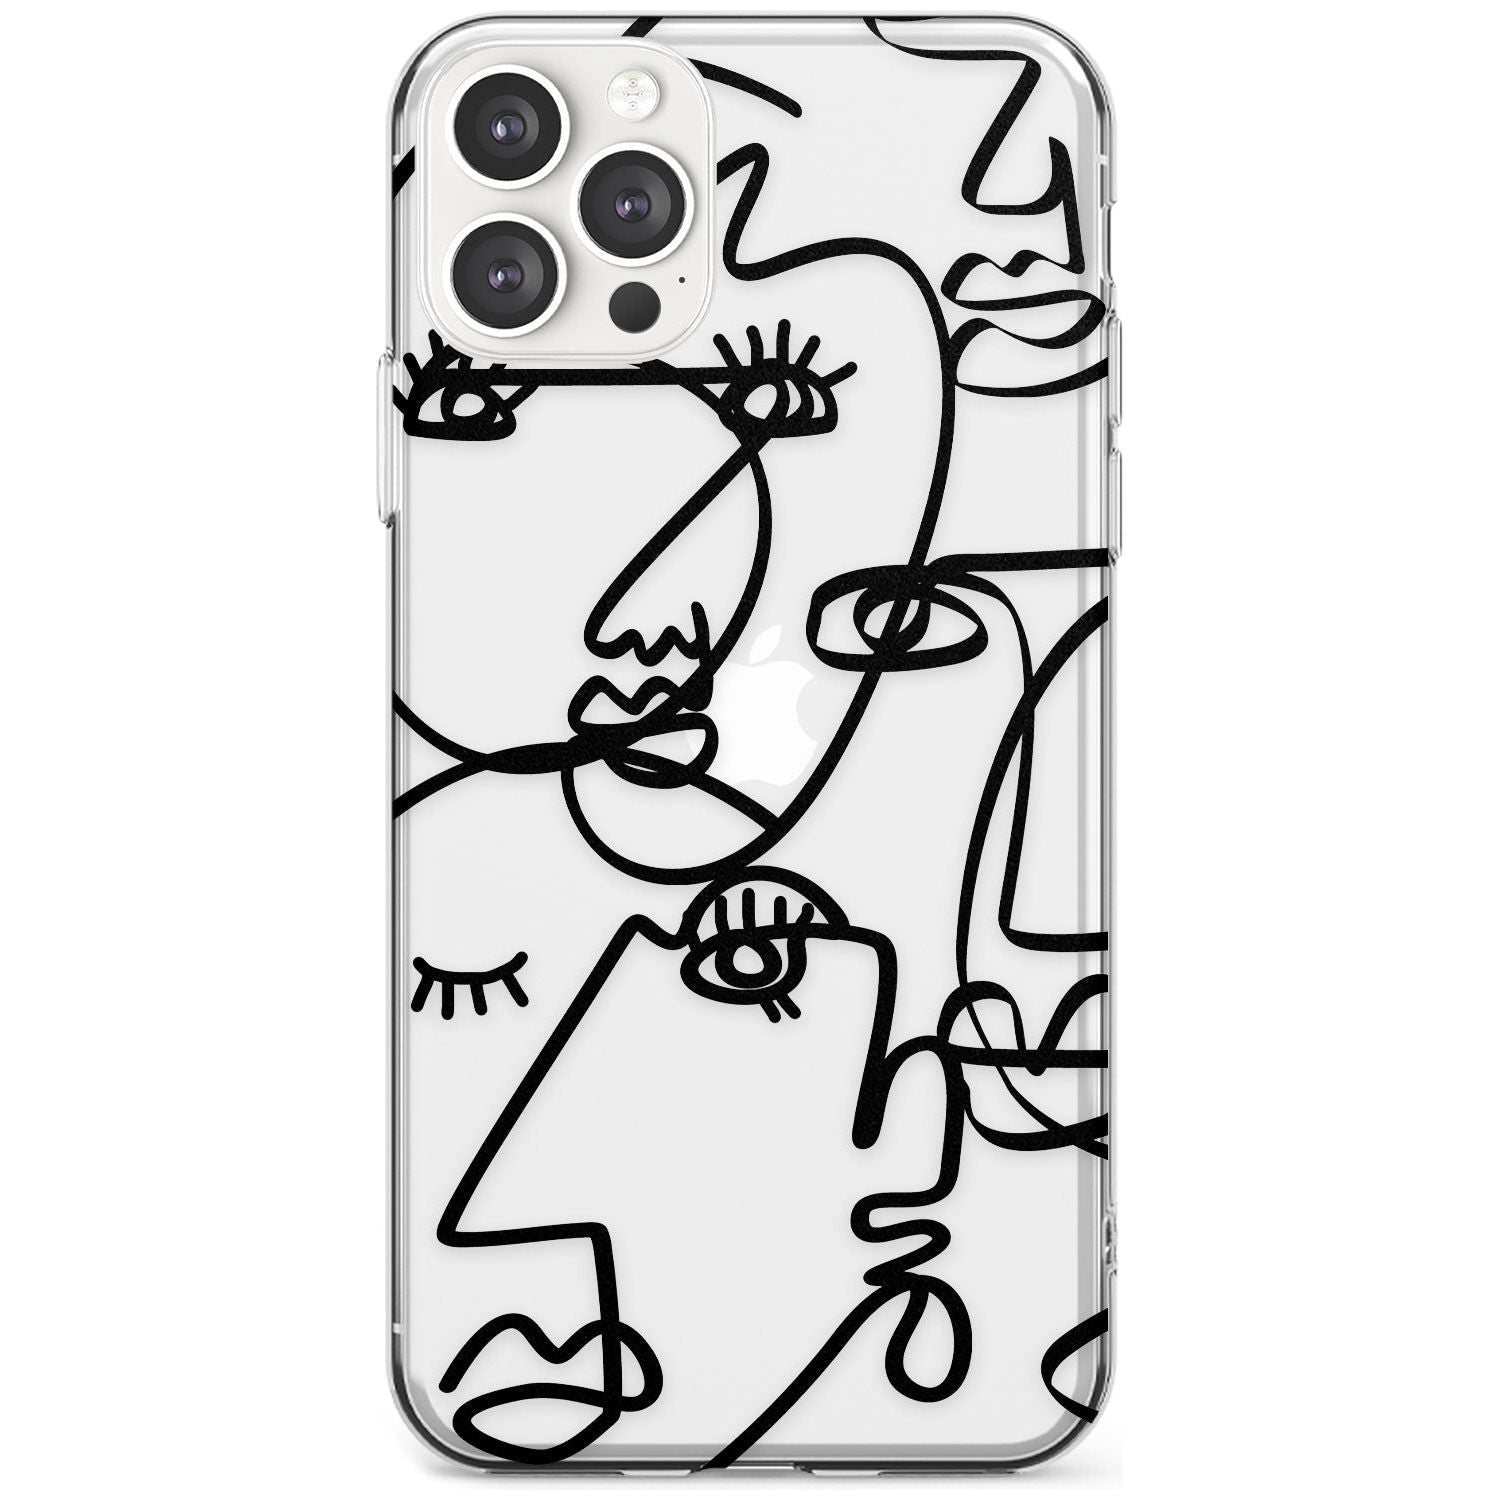 Continuous Line Faces: Black on Clear Black Impact Phone Case for iPhone 11 Pro Max